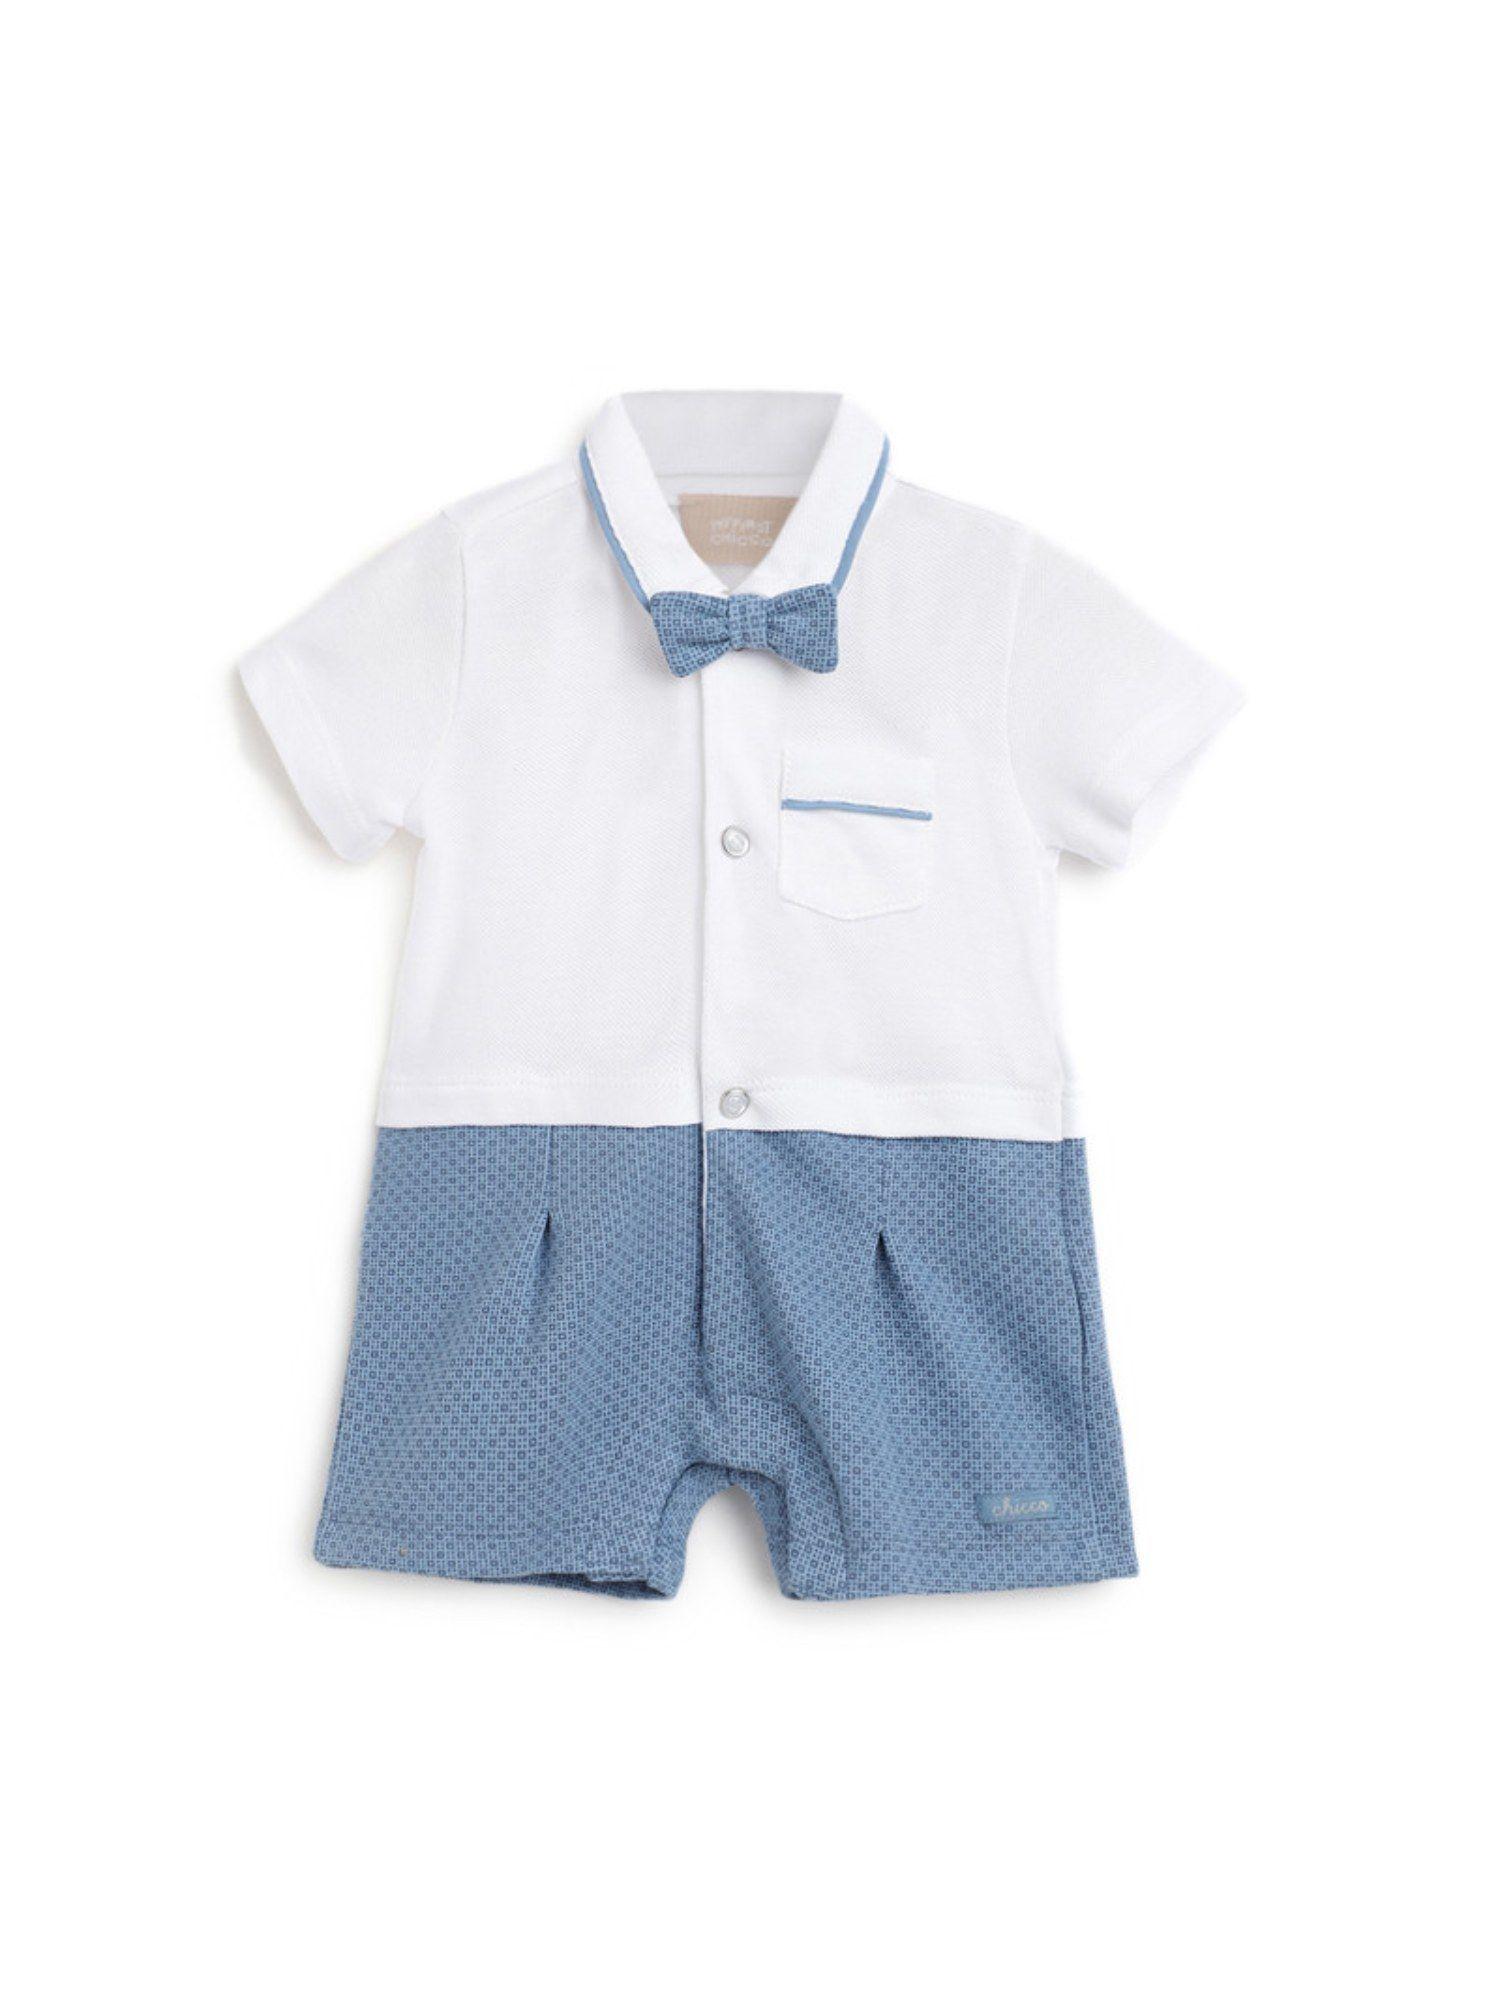 boys-printed-blue-knitted-romper